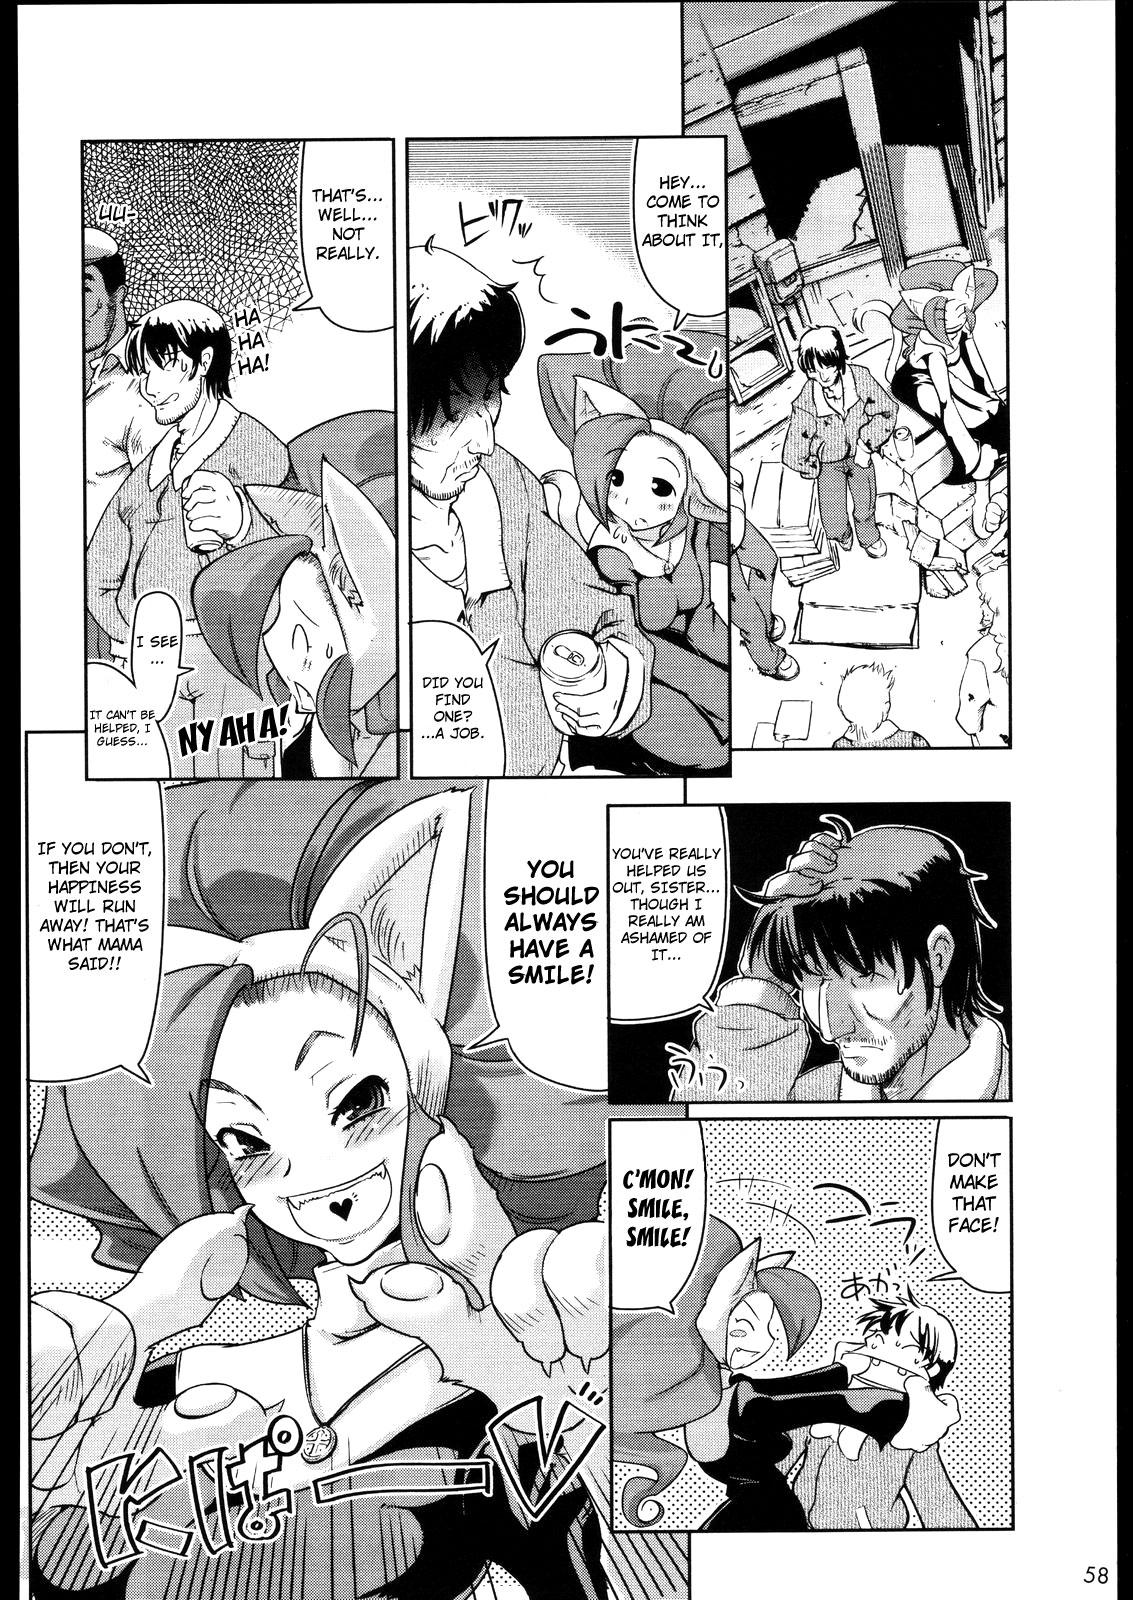 Playing Always Cheerful! - Darkstalkers Ass - Page 4